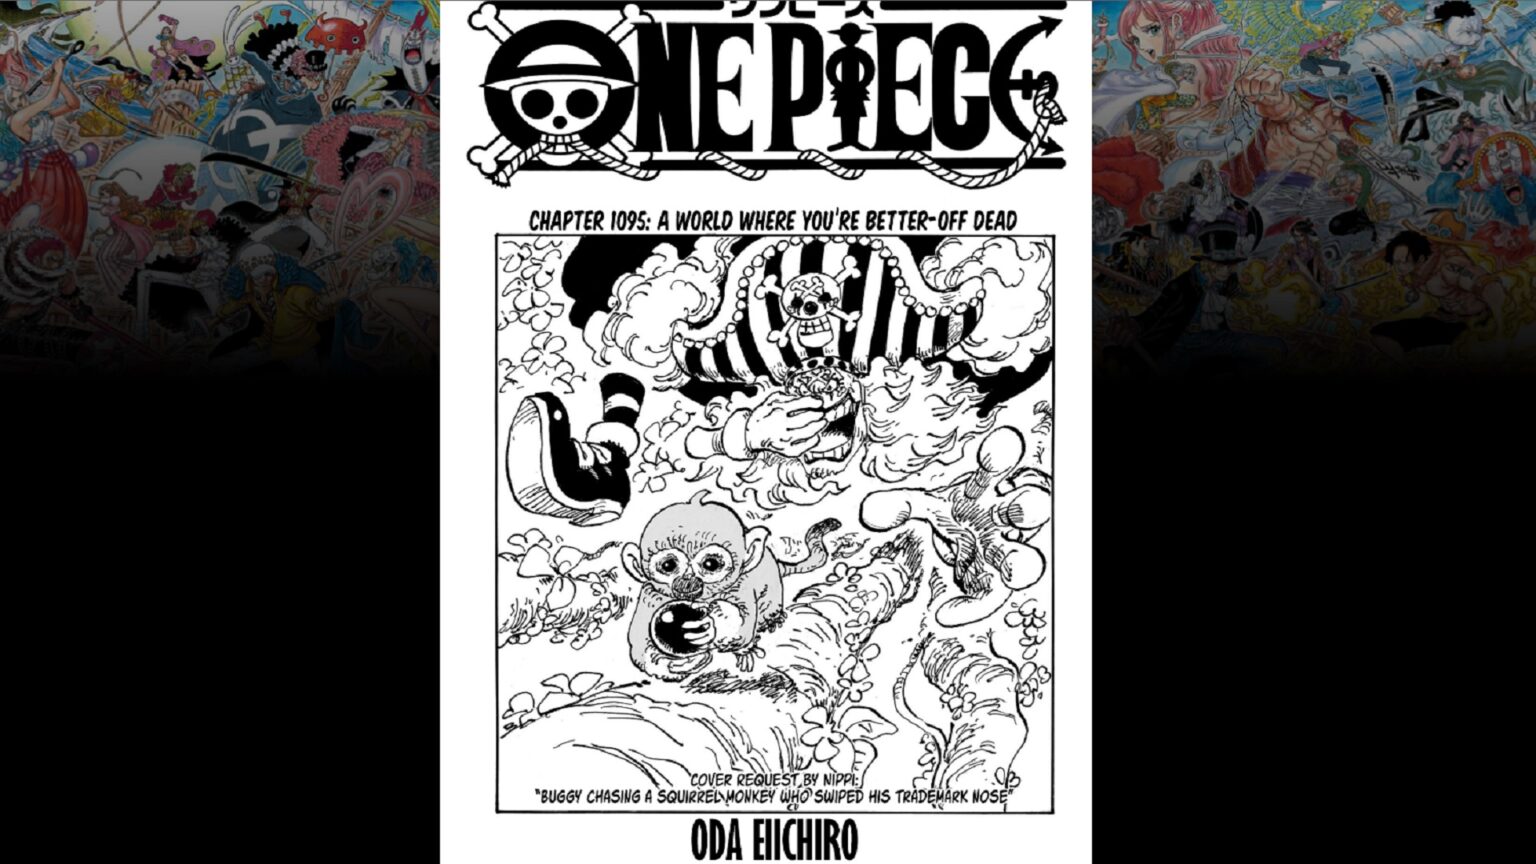 One Piece Chapter 1095 Buggy is chasing a squirrel on the Cover.